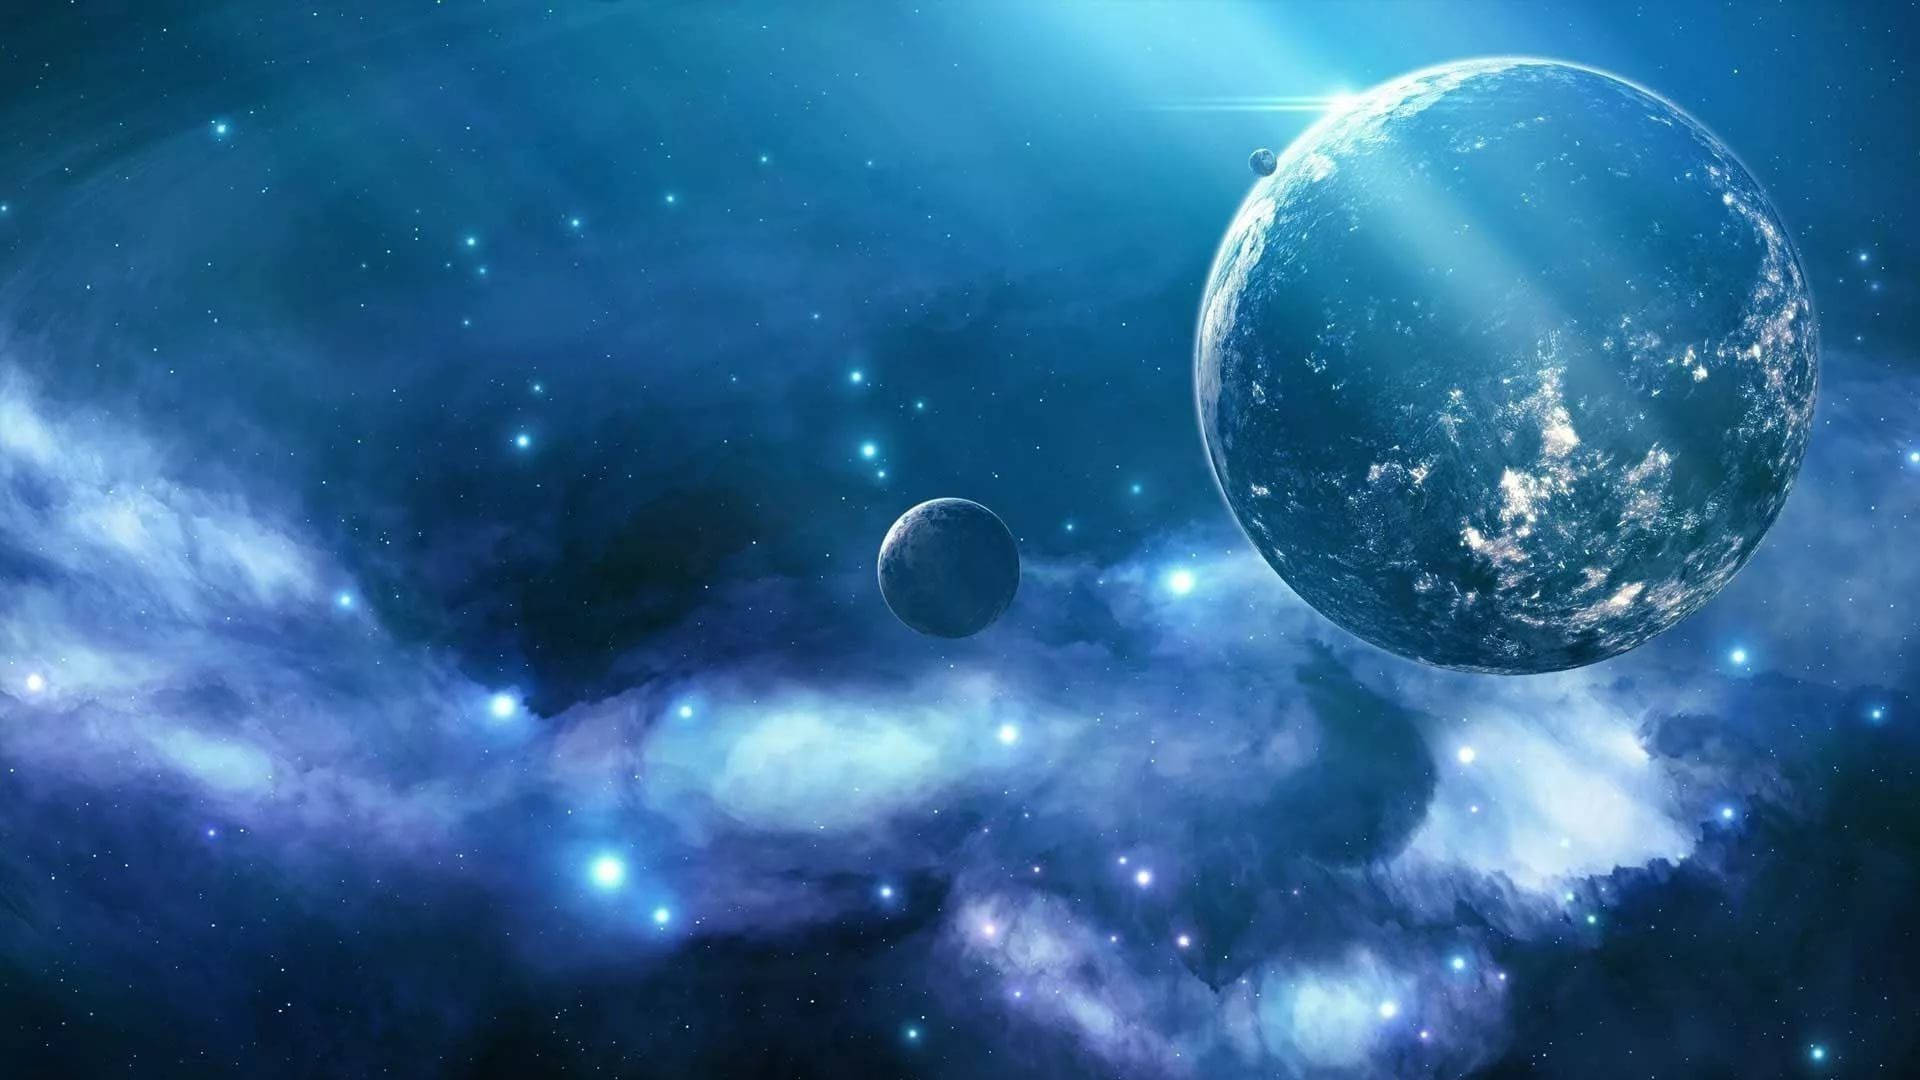 Two Planets In Blue Galaxy Background Wallpaper